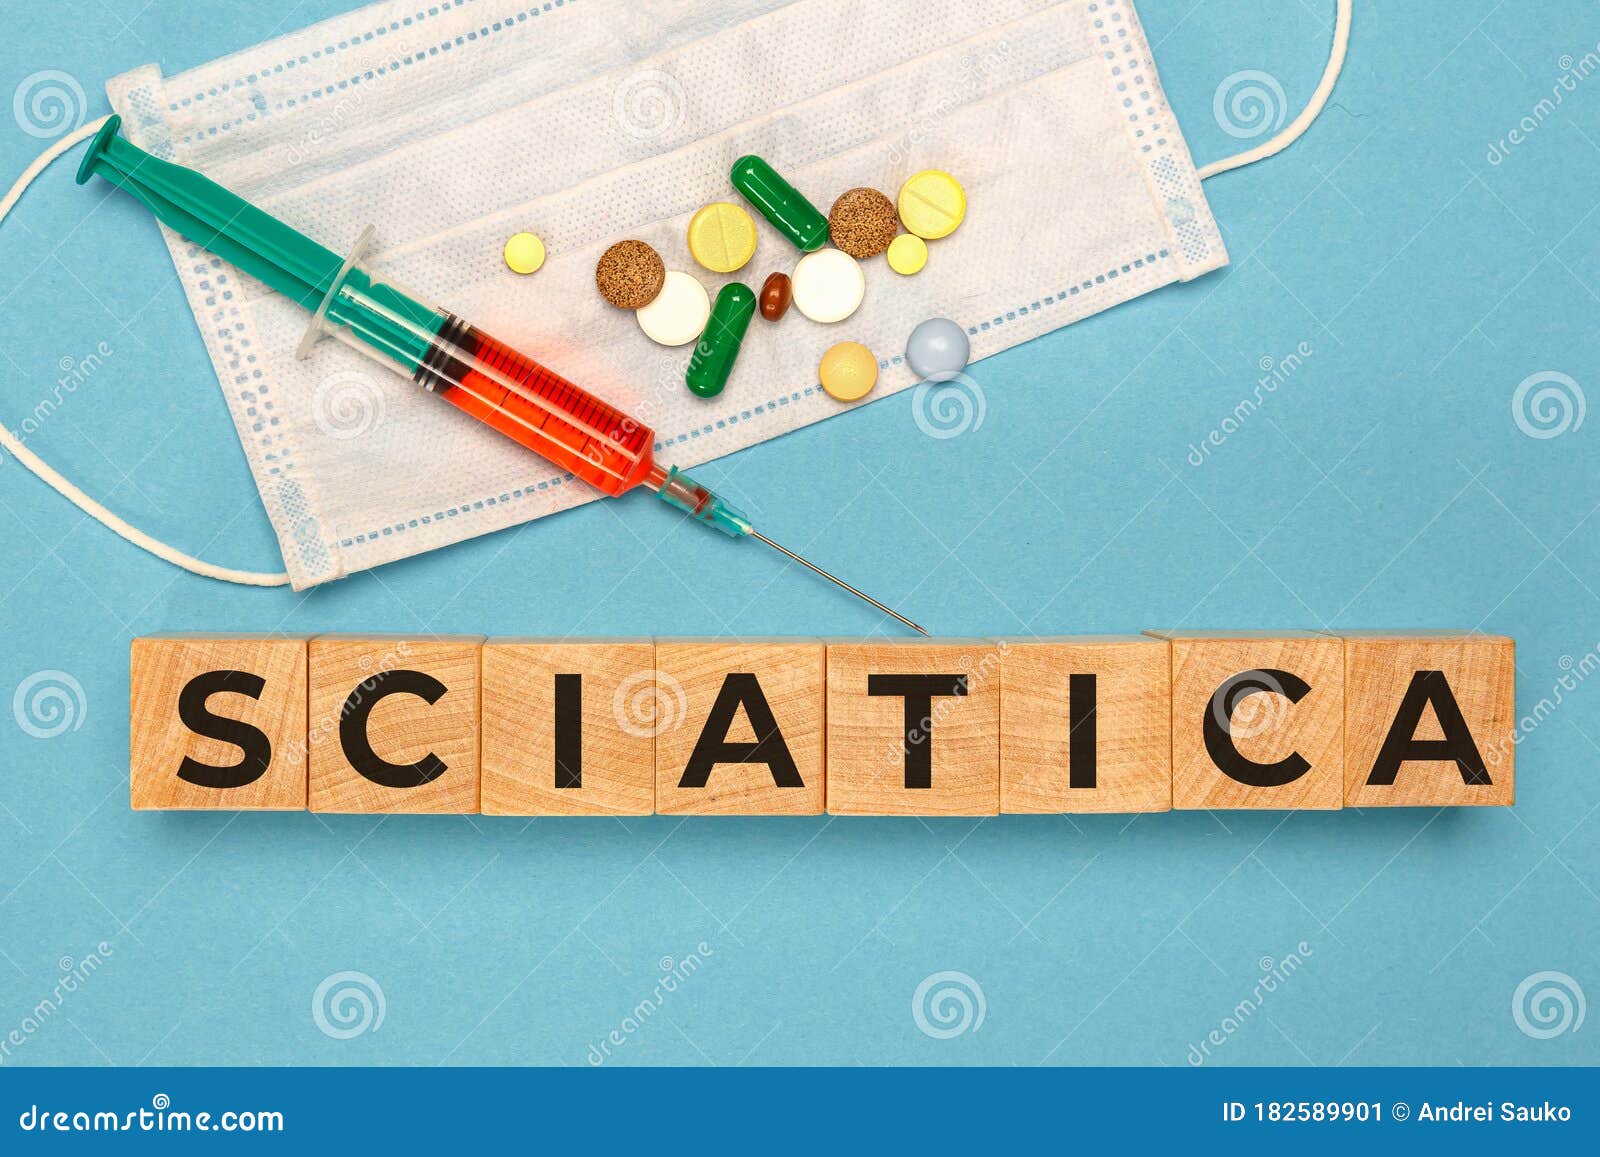 wooden cube with text sciatica